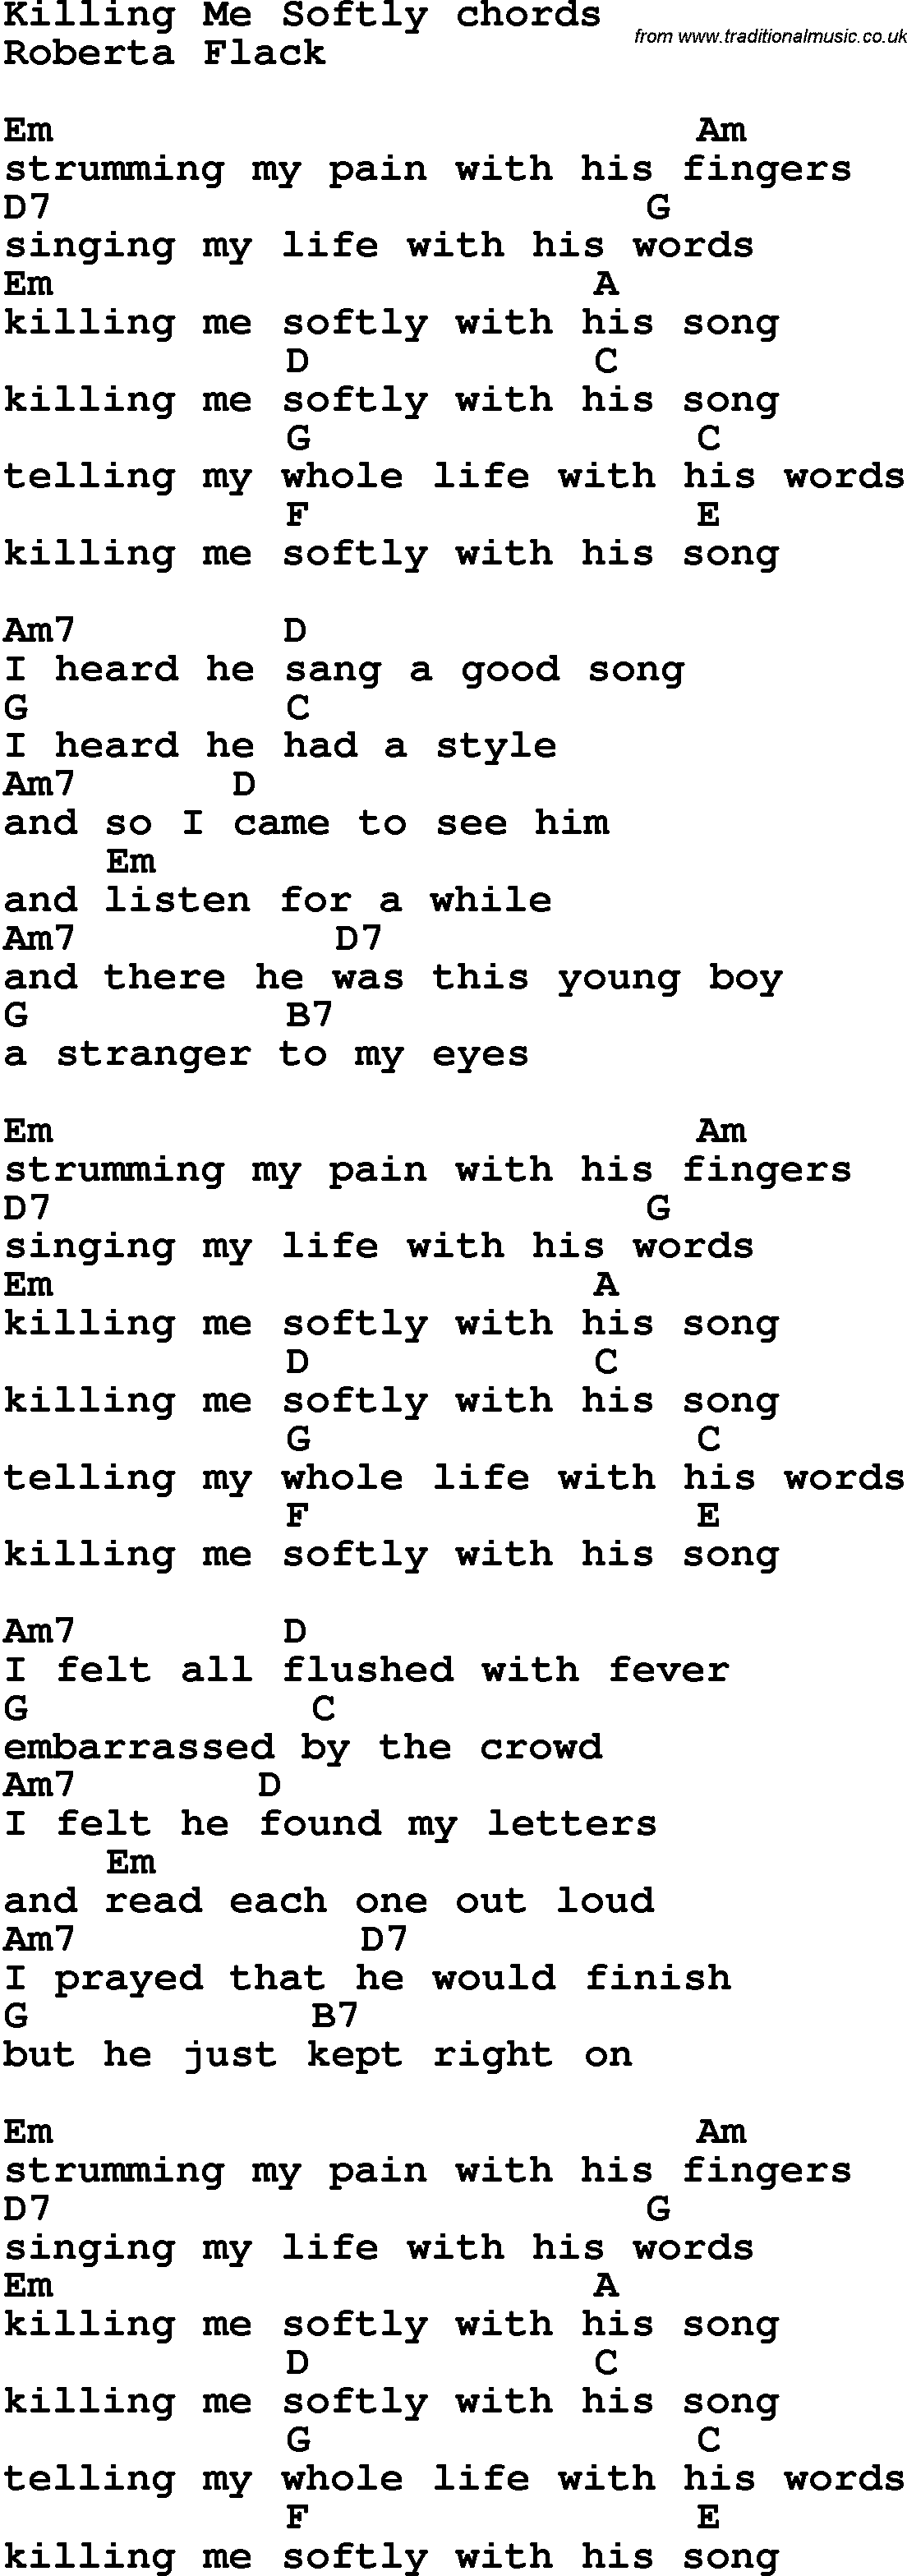 Song Lyrics with guitar chords for Killing Me Softly